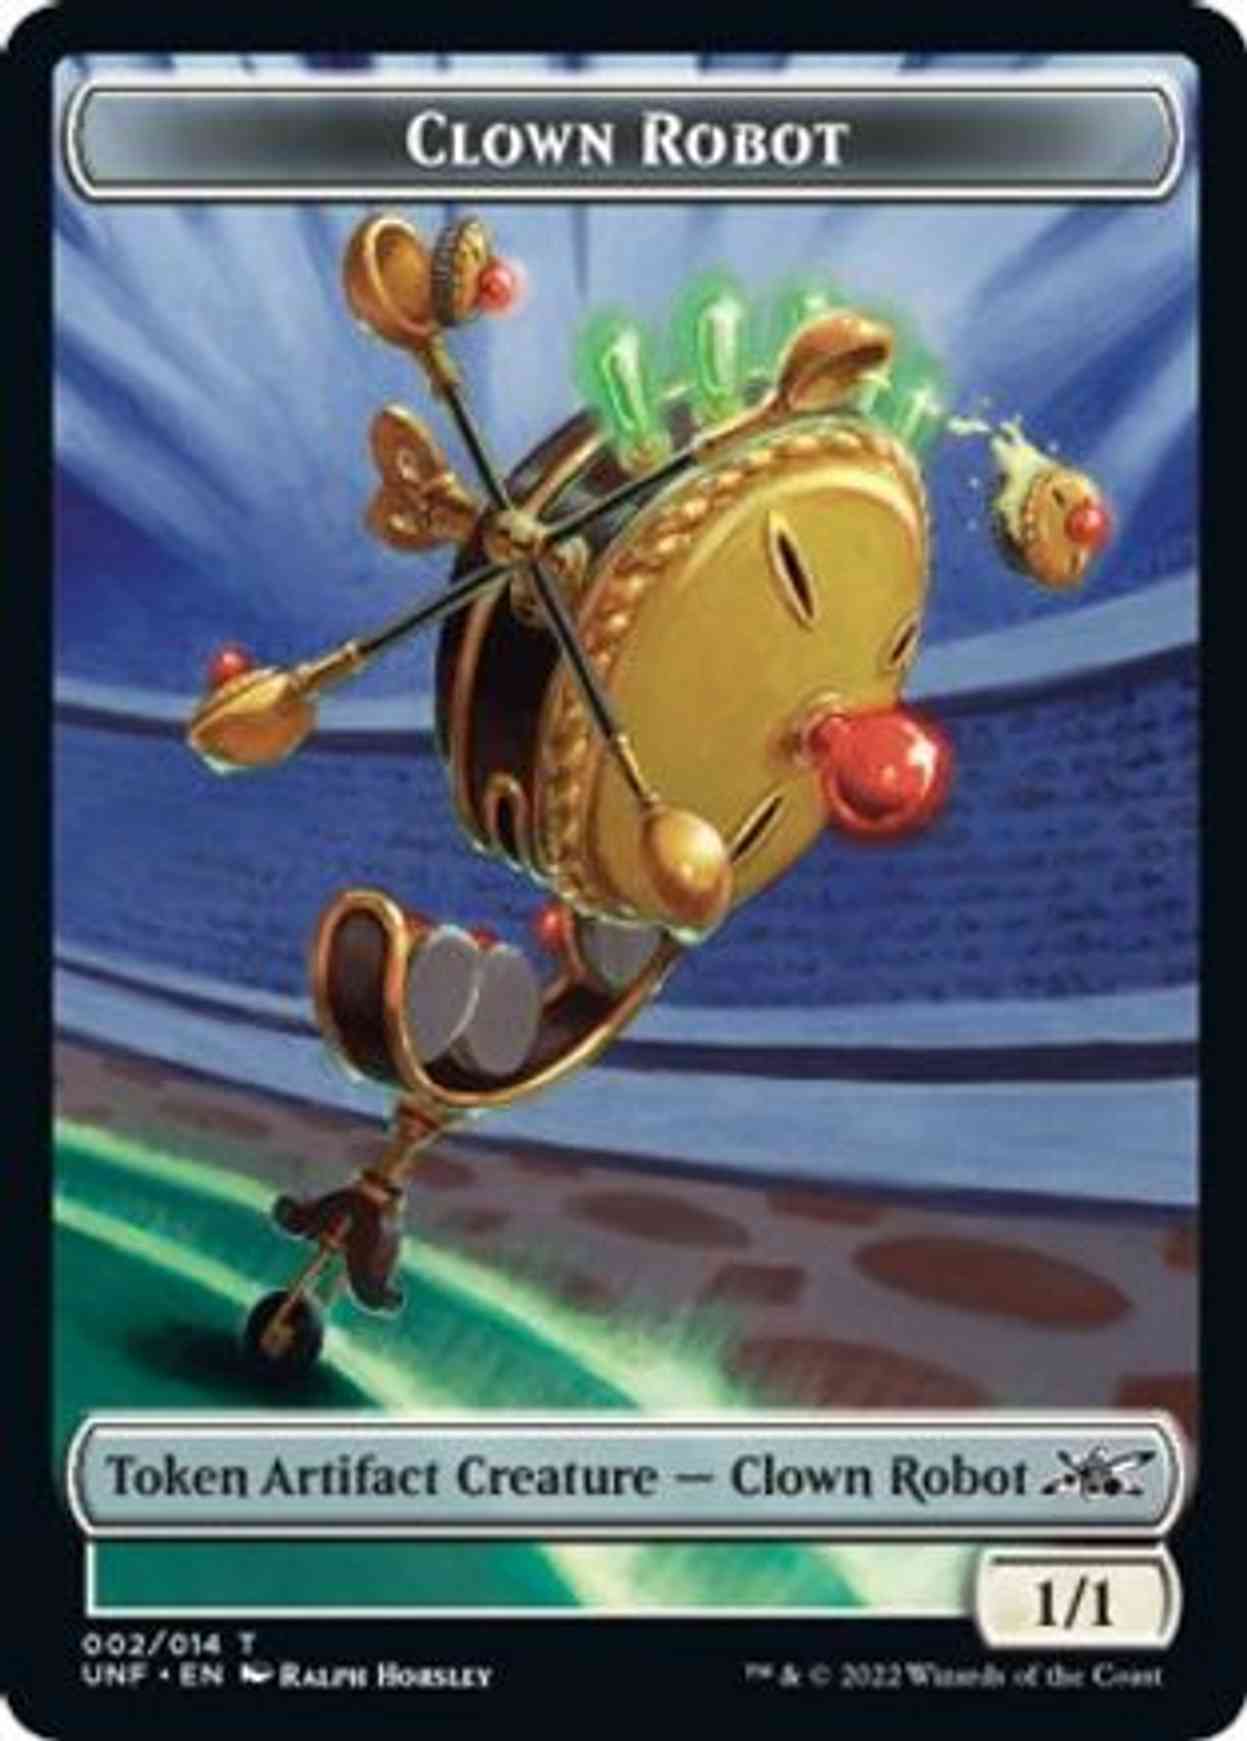 Clown Robot (002) // Food (011) Double-sided Token magic card front